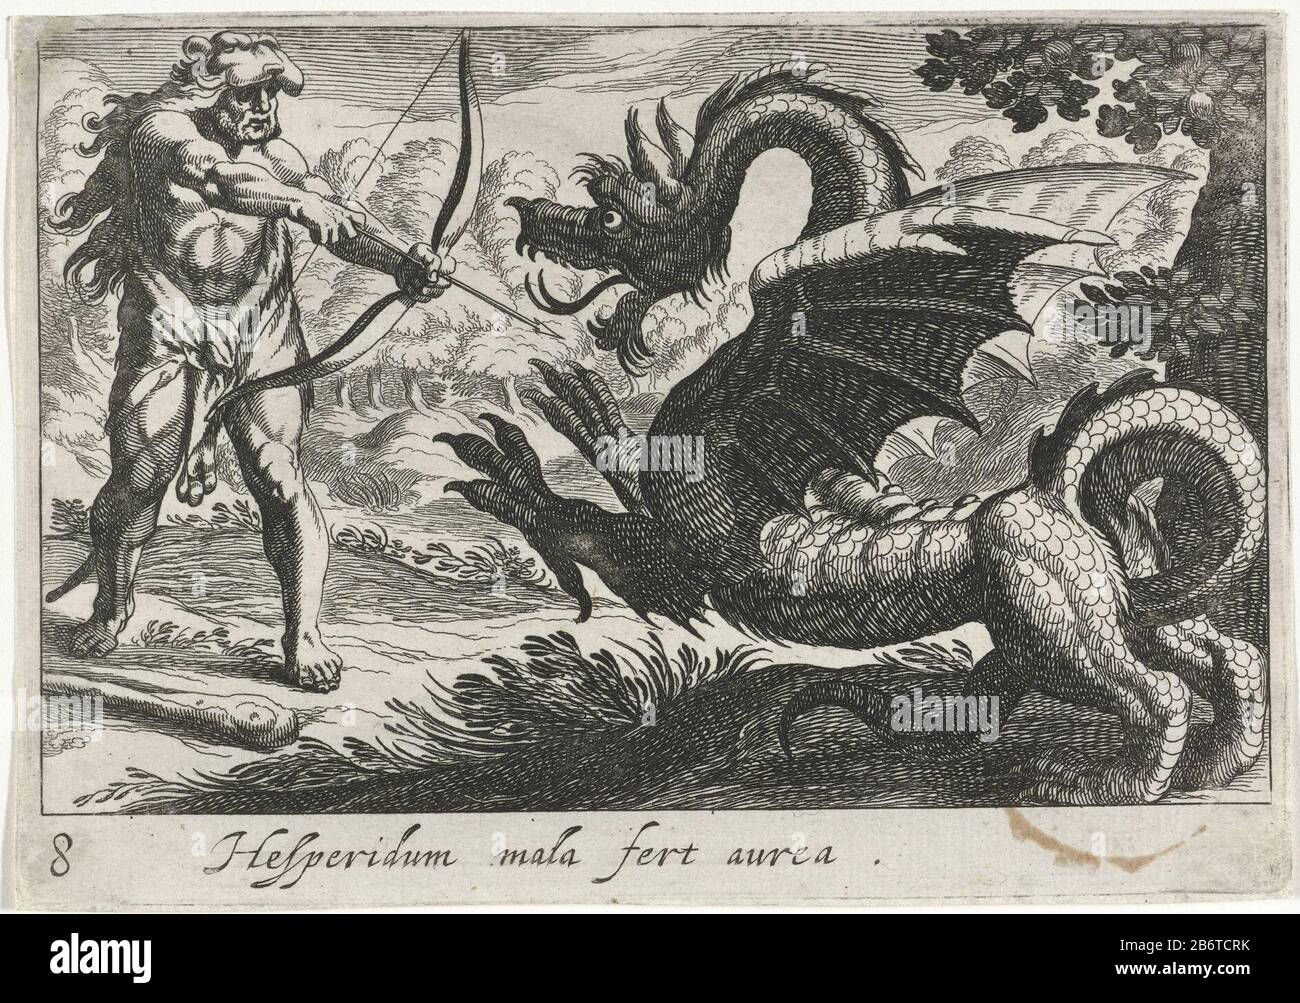 Hercules doodt de draak Ladon Hesperidum mala fert aurea (titel op object) Herculische thema's (serietitel) Hercules stands with a drawn bow for the dragon Ladon, the guardian of the tree Hesperiden. Manufacturer : printmaker Simon Frisiusnaar design: Antonio Tempesta Place manufacture : printmaker: Northern Netherlands to design: Italy Date: 1610 - 1664 Physical features: etching material: paper Technique: etching dimensions: plate edge: h 97 mm × W 143 mm Subject: Hercules kills Ladon, the dragon How many followers kept the tree of the Hesperides Ride Stock Photo